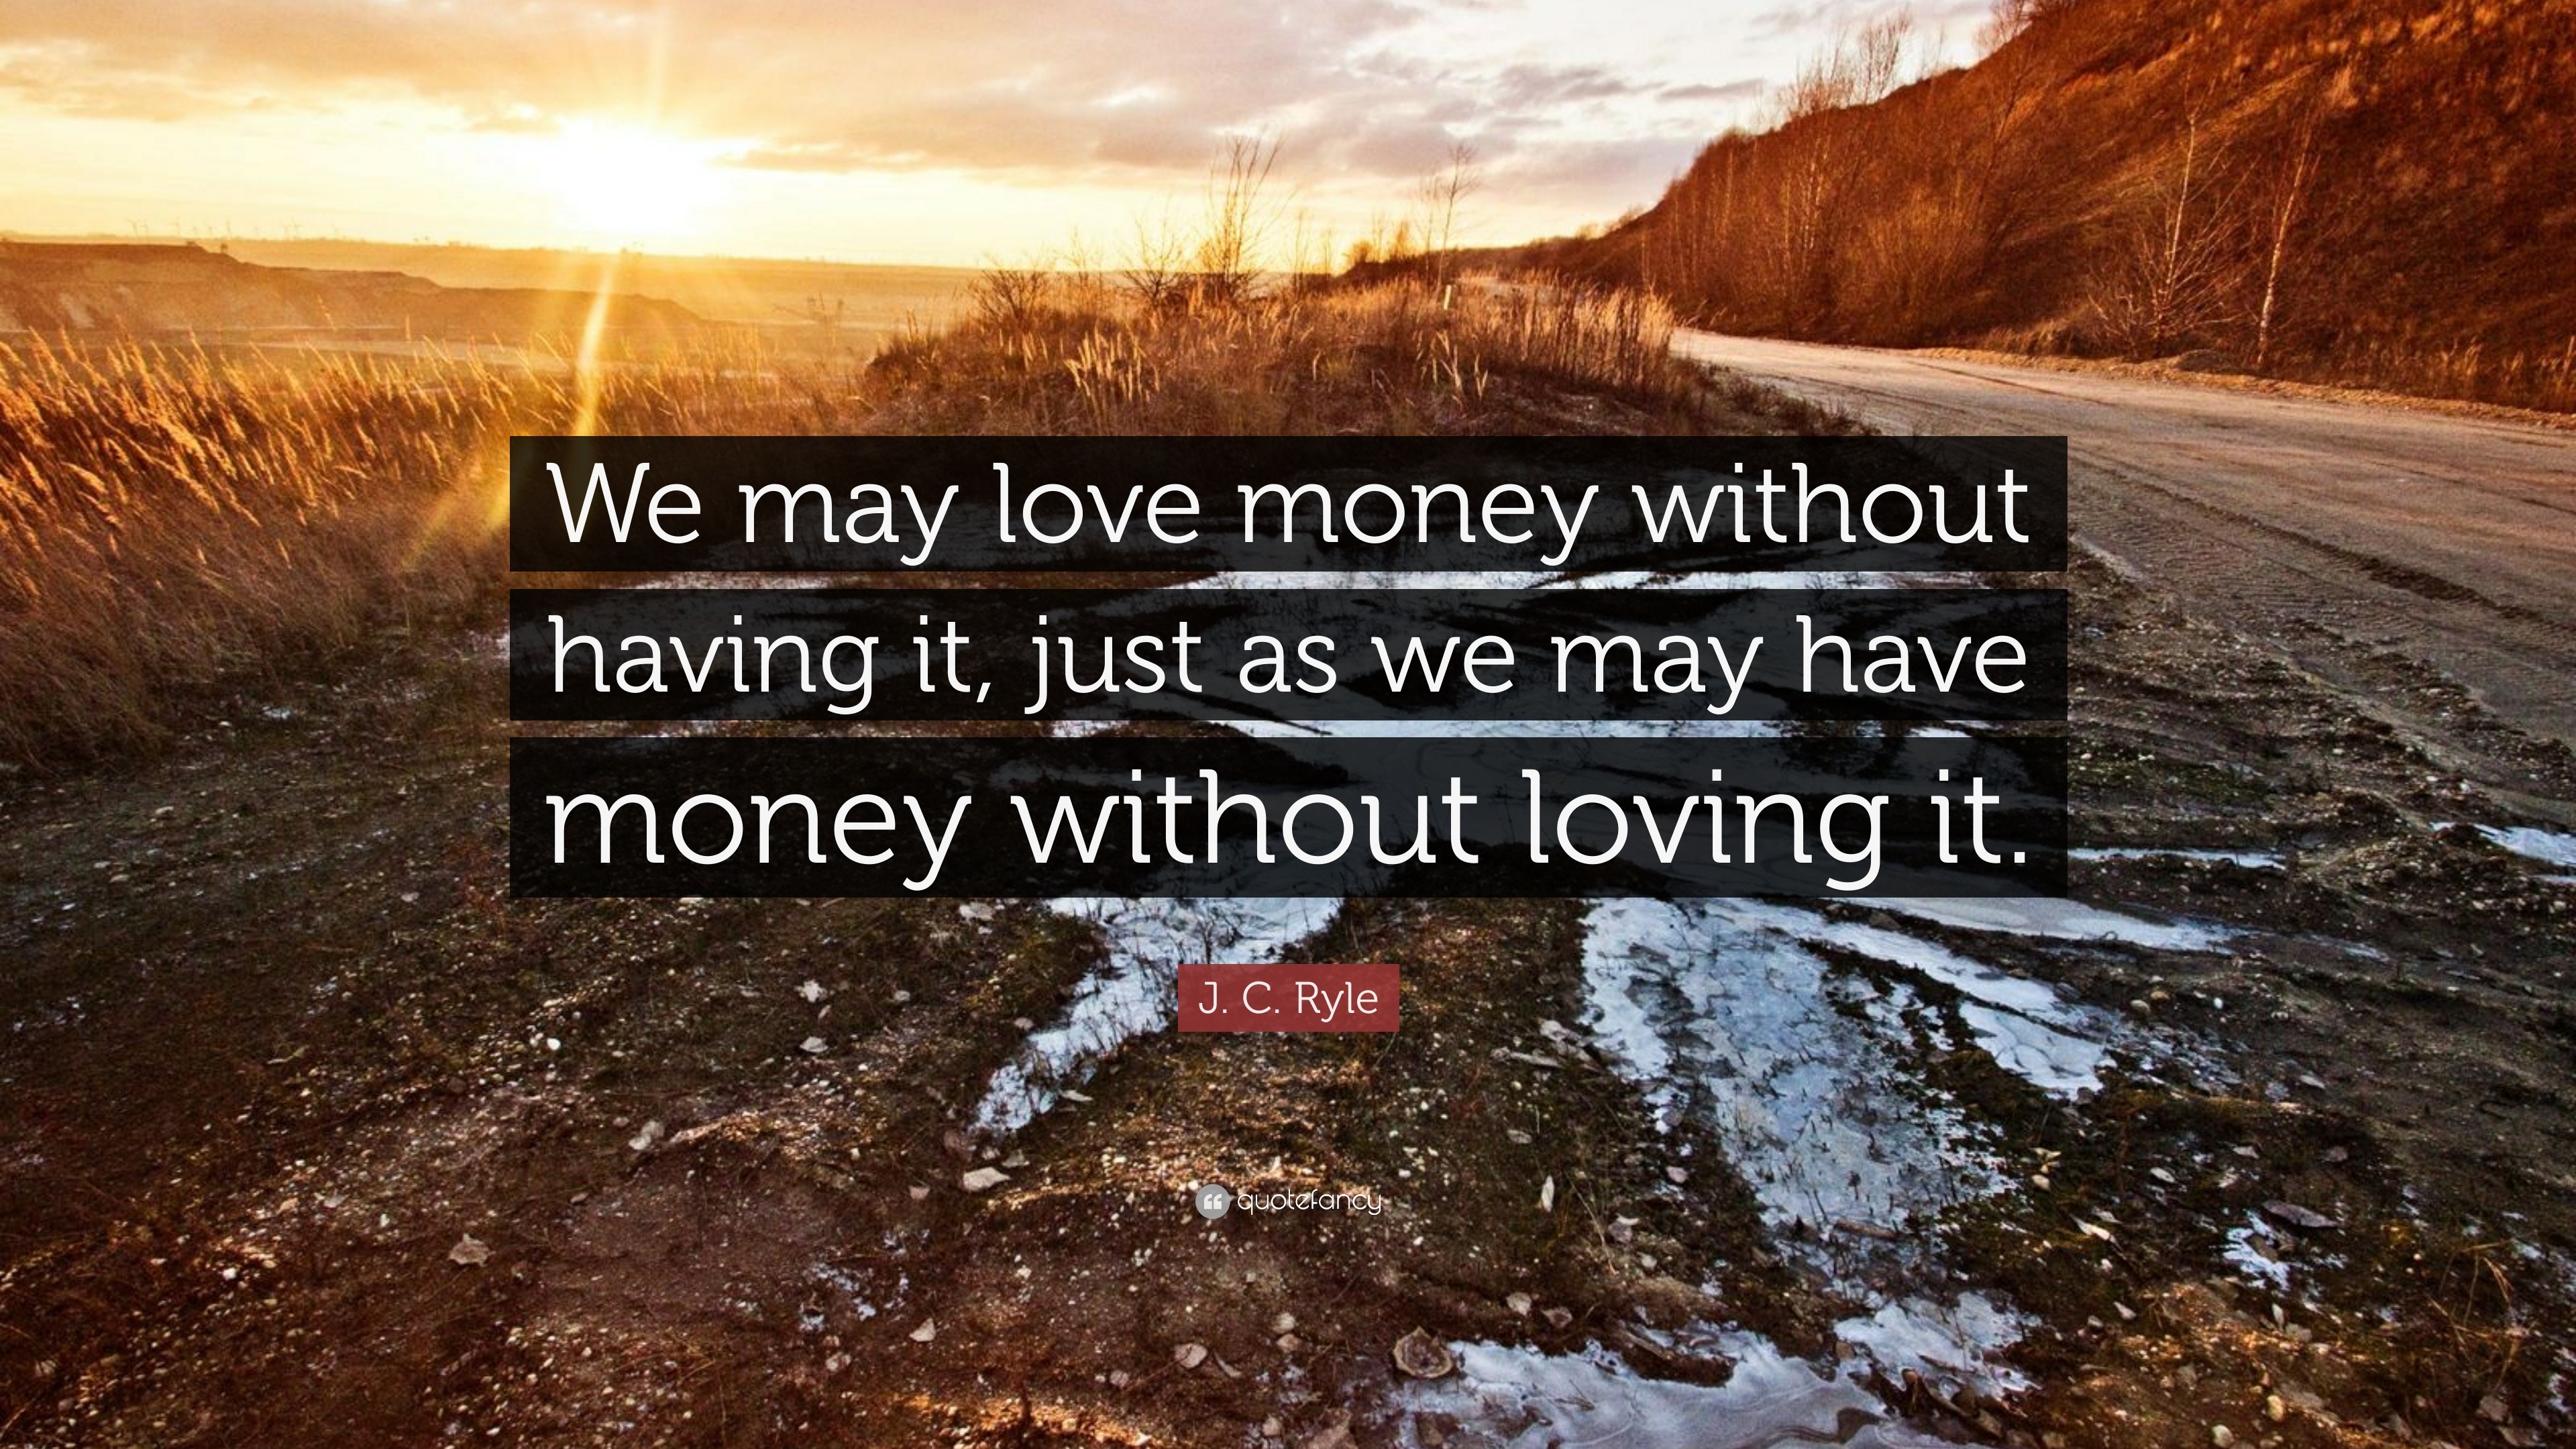 J. C. Ryle Quote: “We may love money without having it, just as we may ...